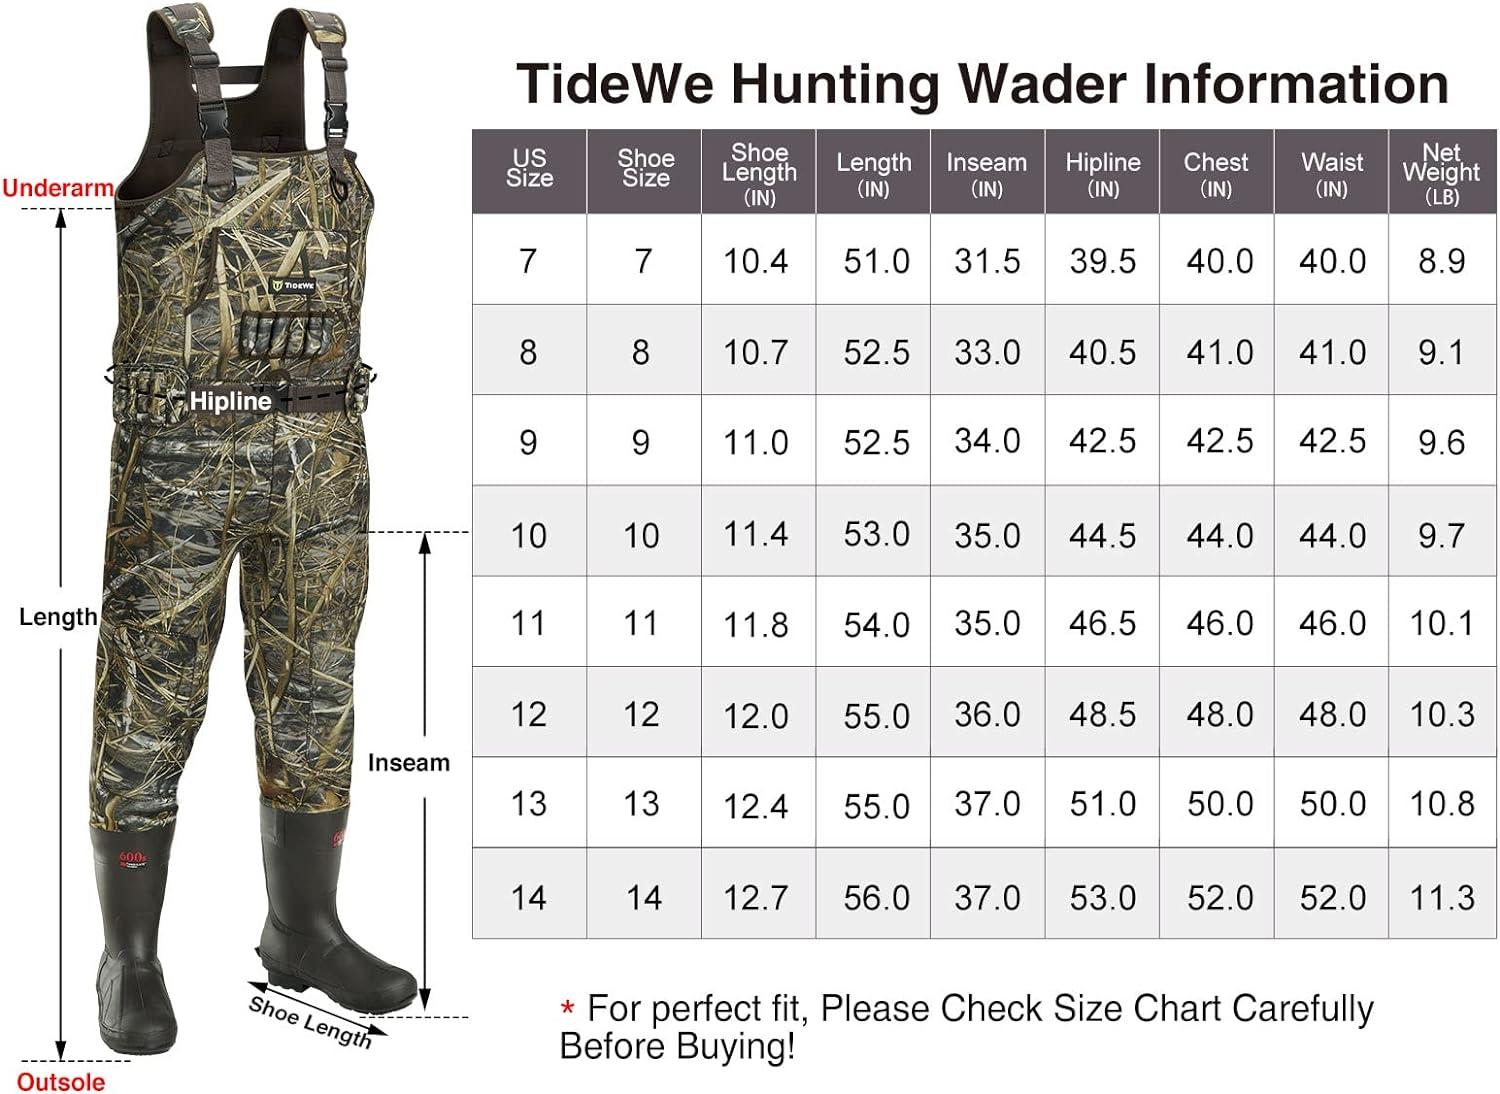 Guide Gear 3.5mm Mens Insulated Hunting Chest Waders with Boots, Camo  Neoprene with 600-Gram Insulation 